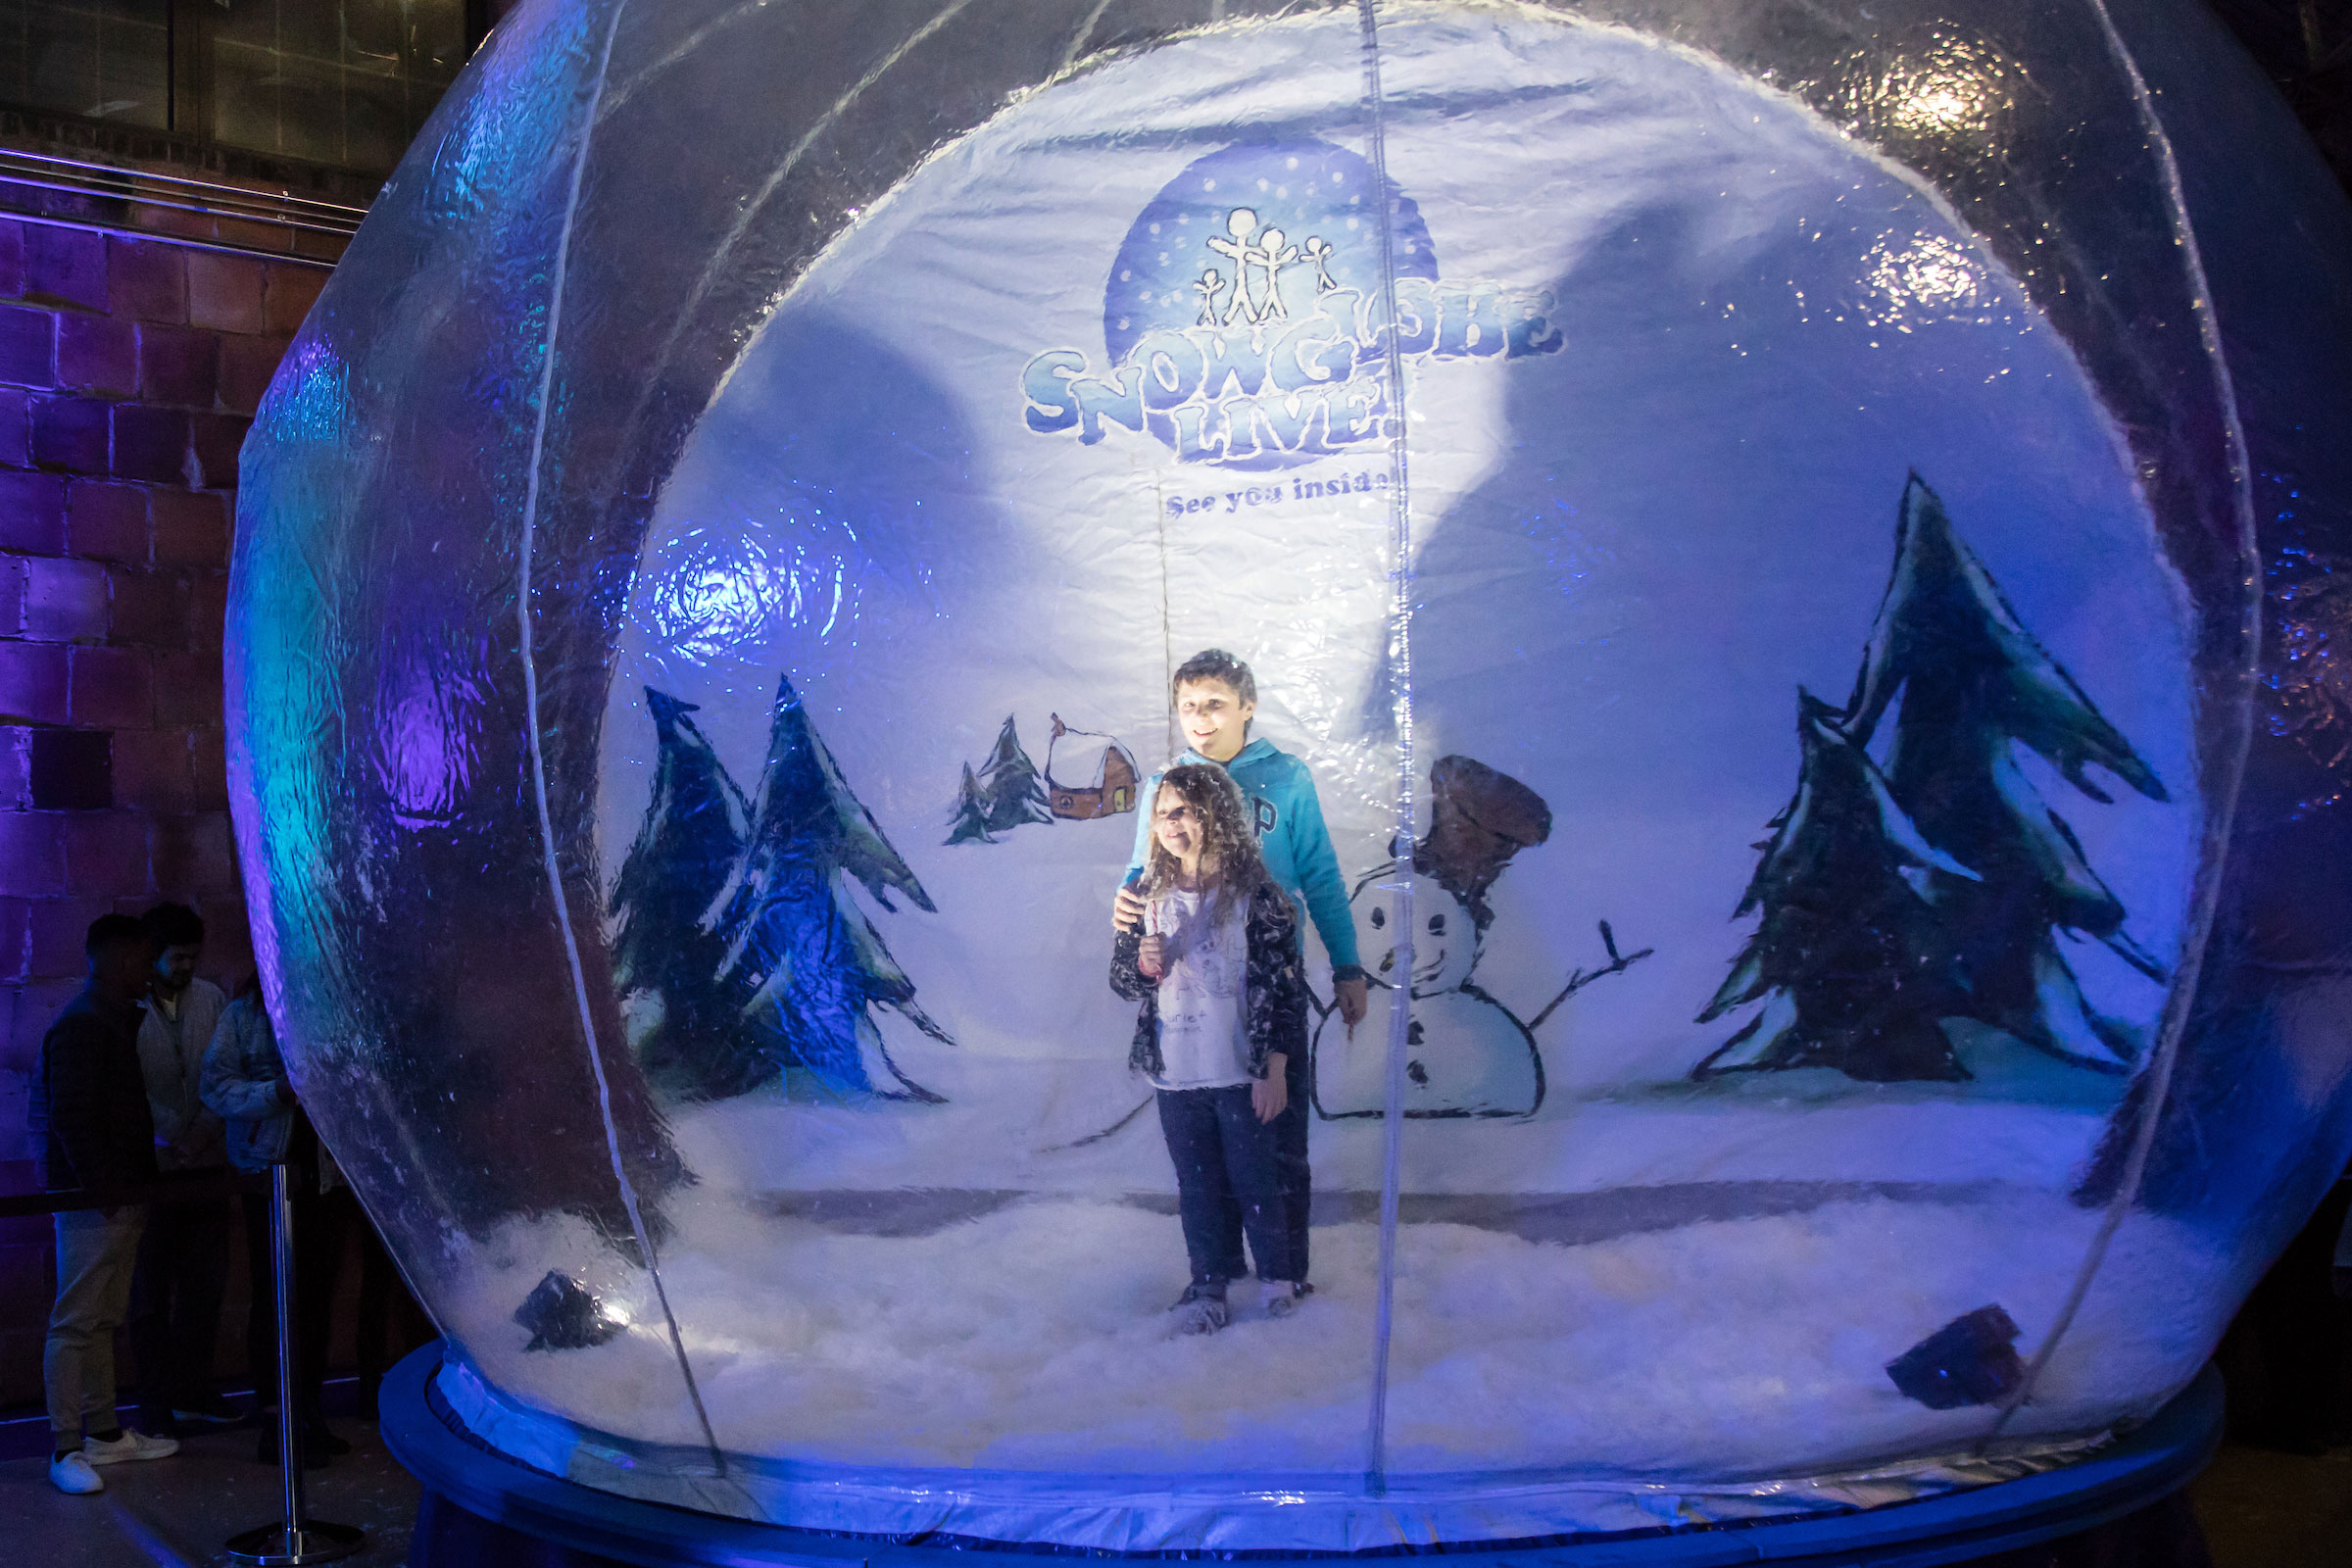 Two children pose inside an inflatable snow globe